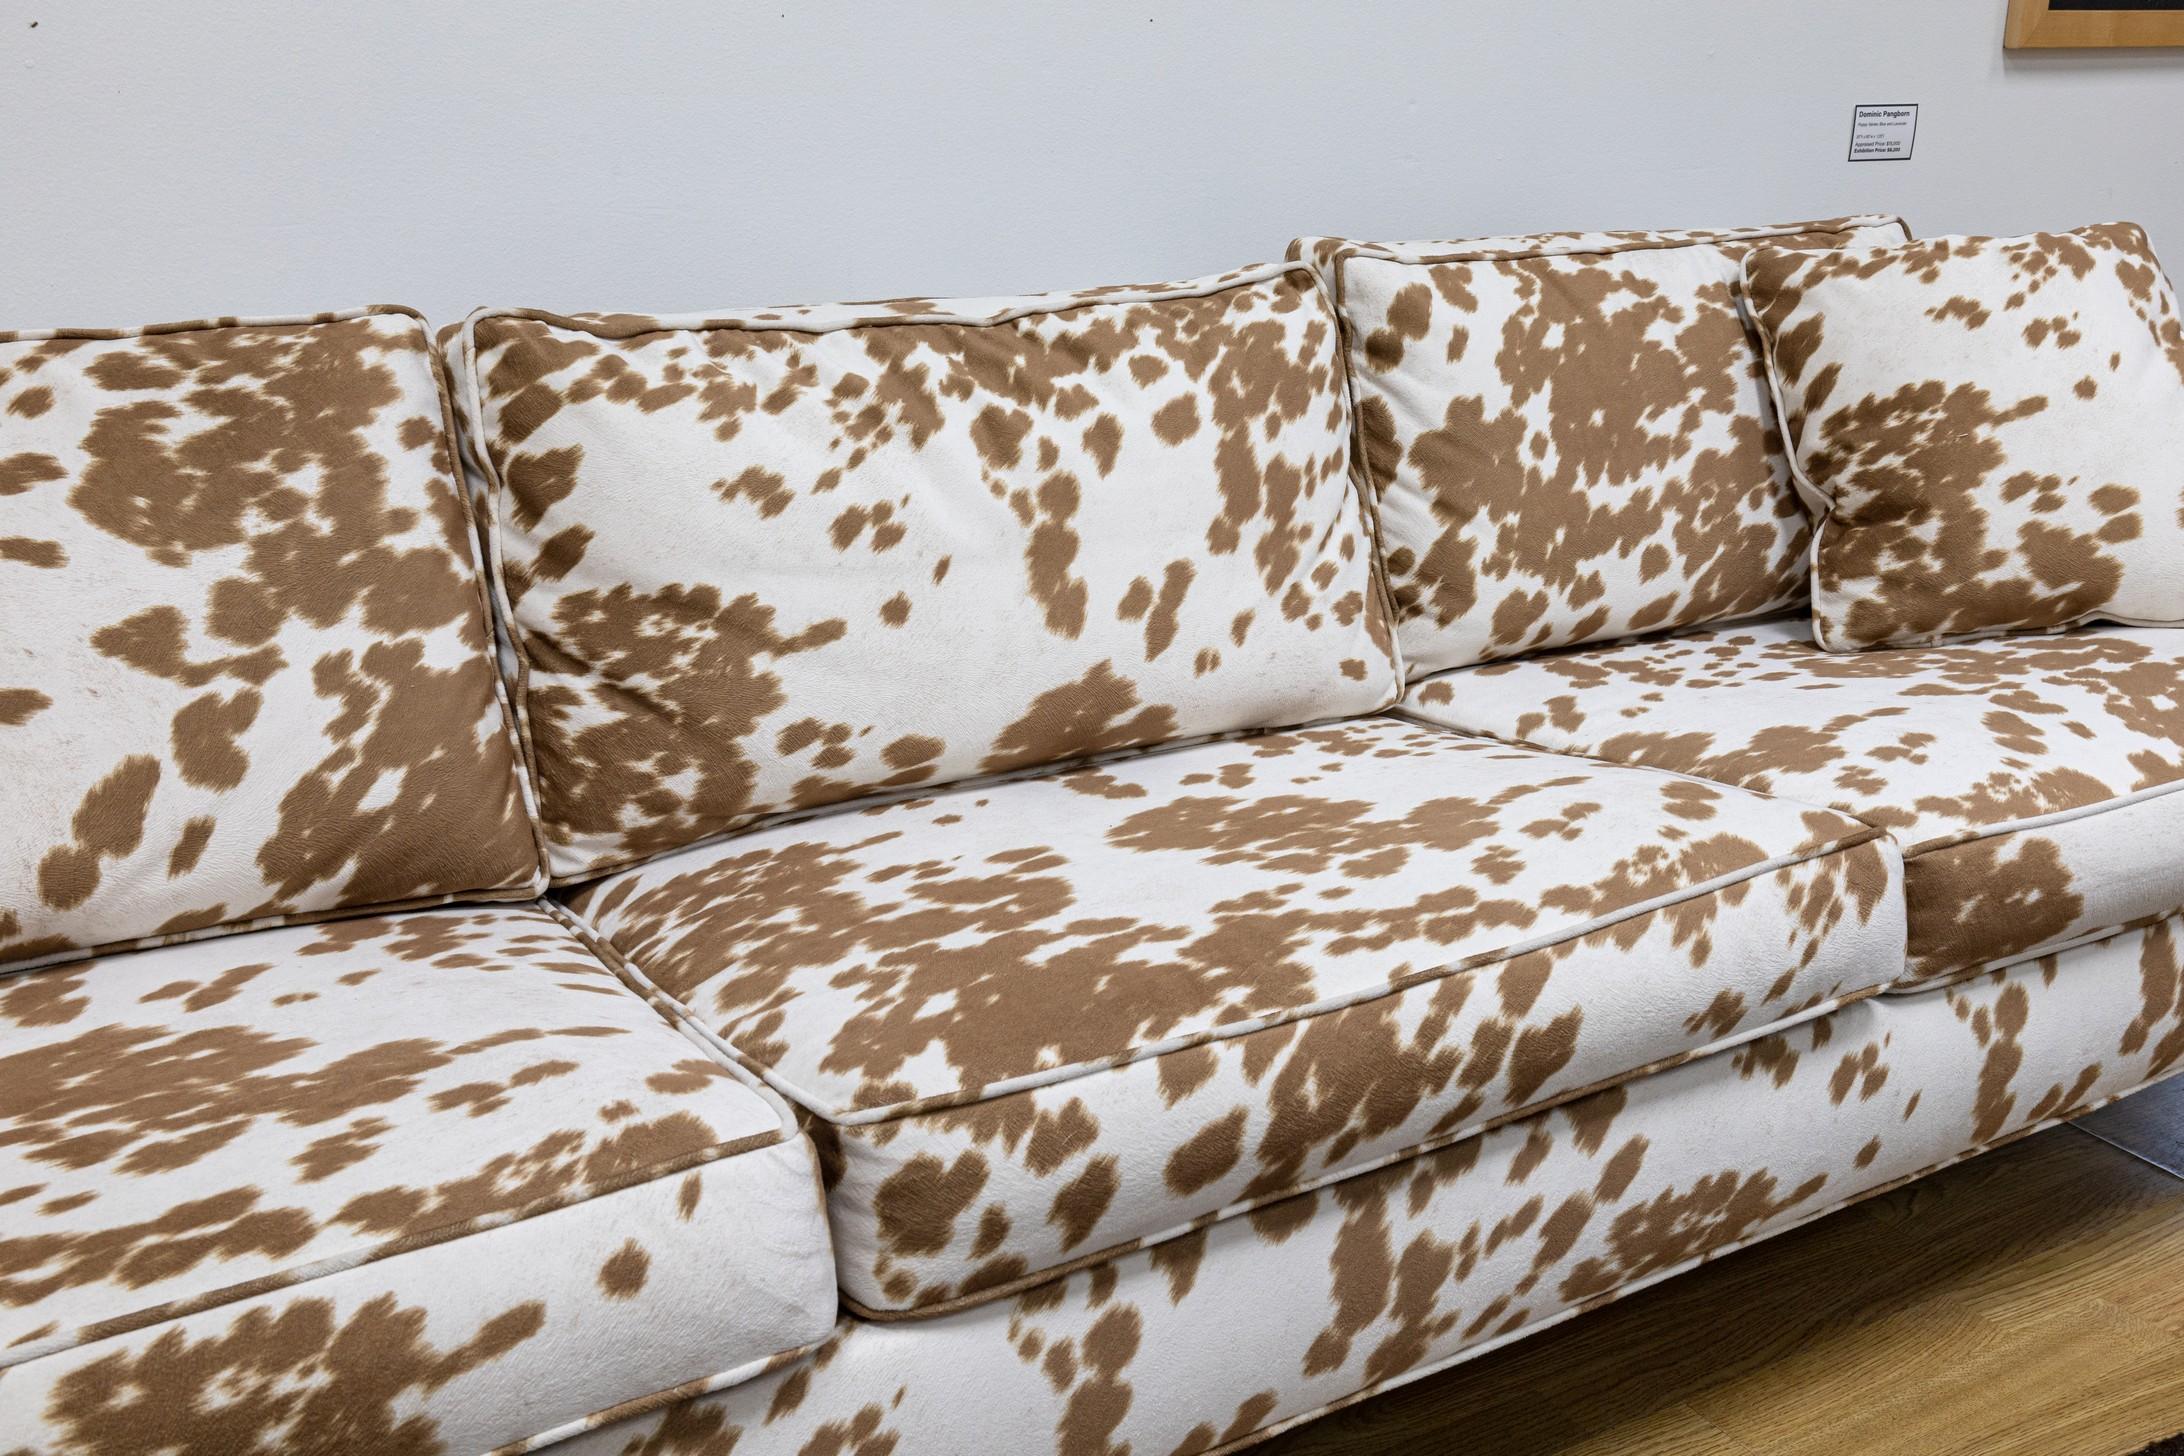 20th Century Milo Baughman Style Directional Sofa with Cow Print Fabric and Wooden Legs For Sale